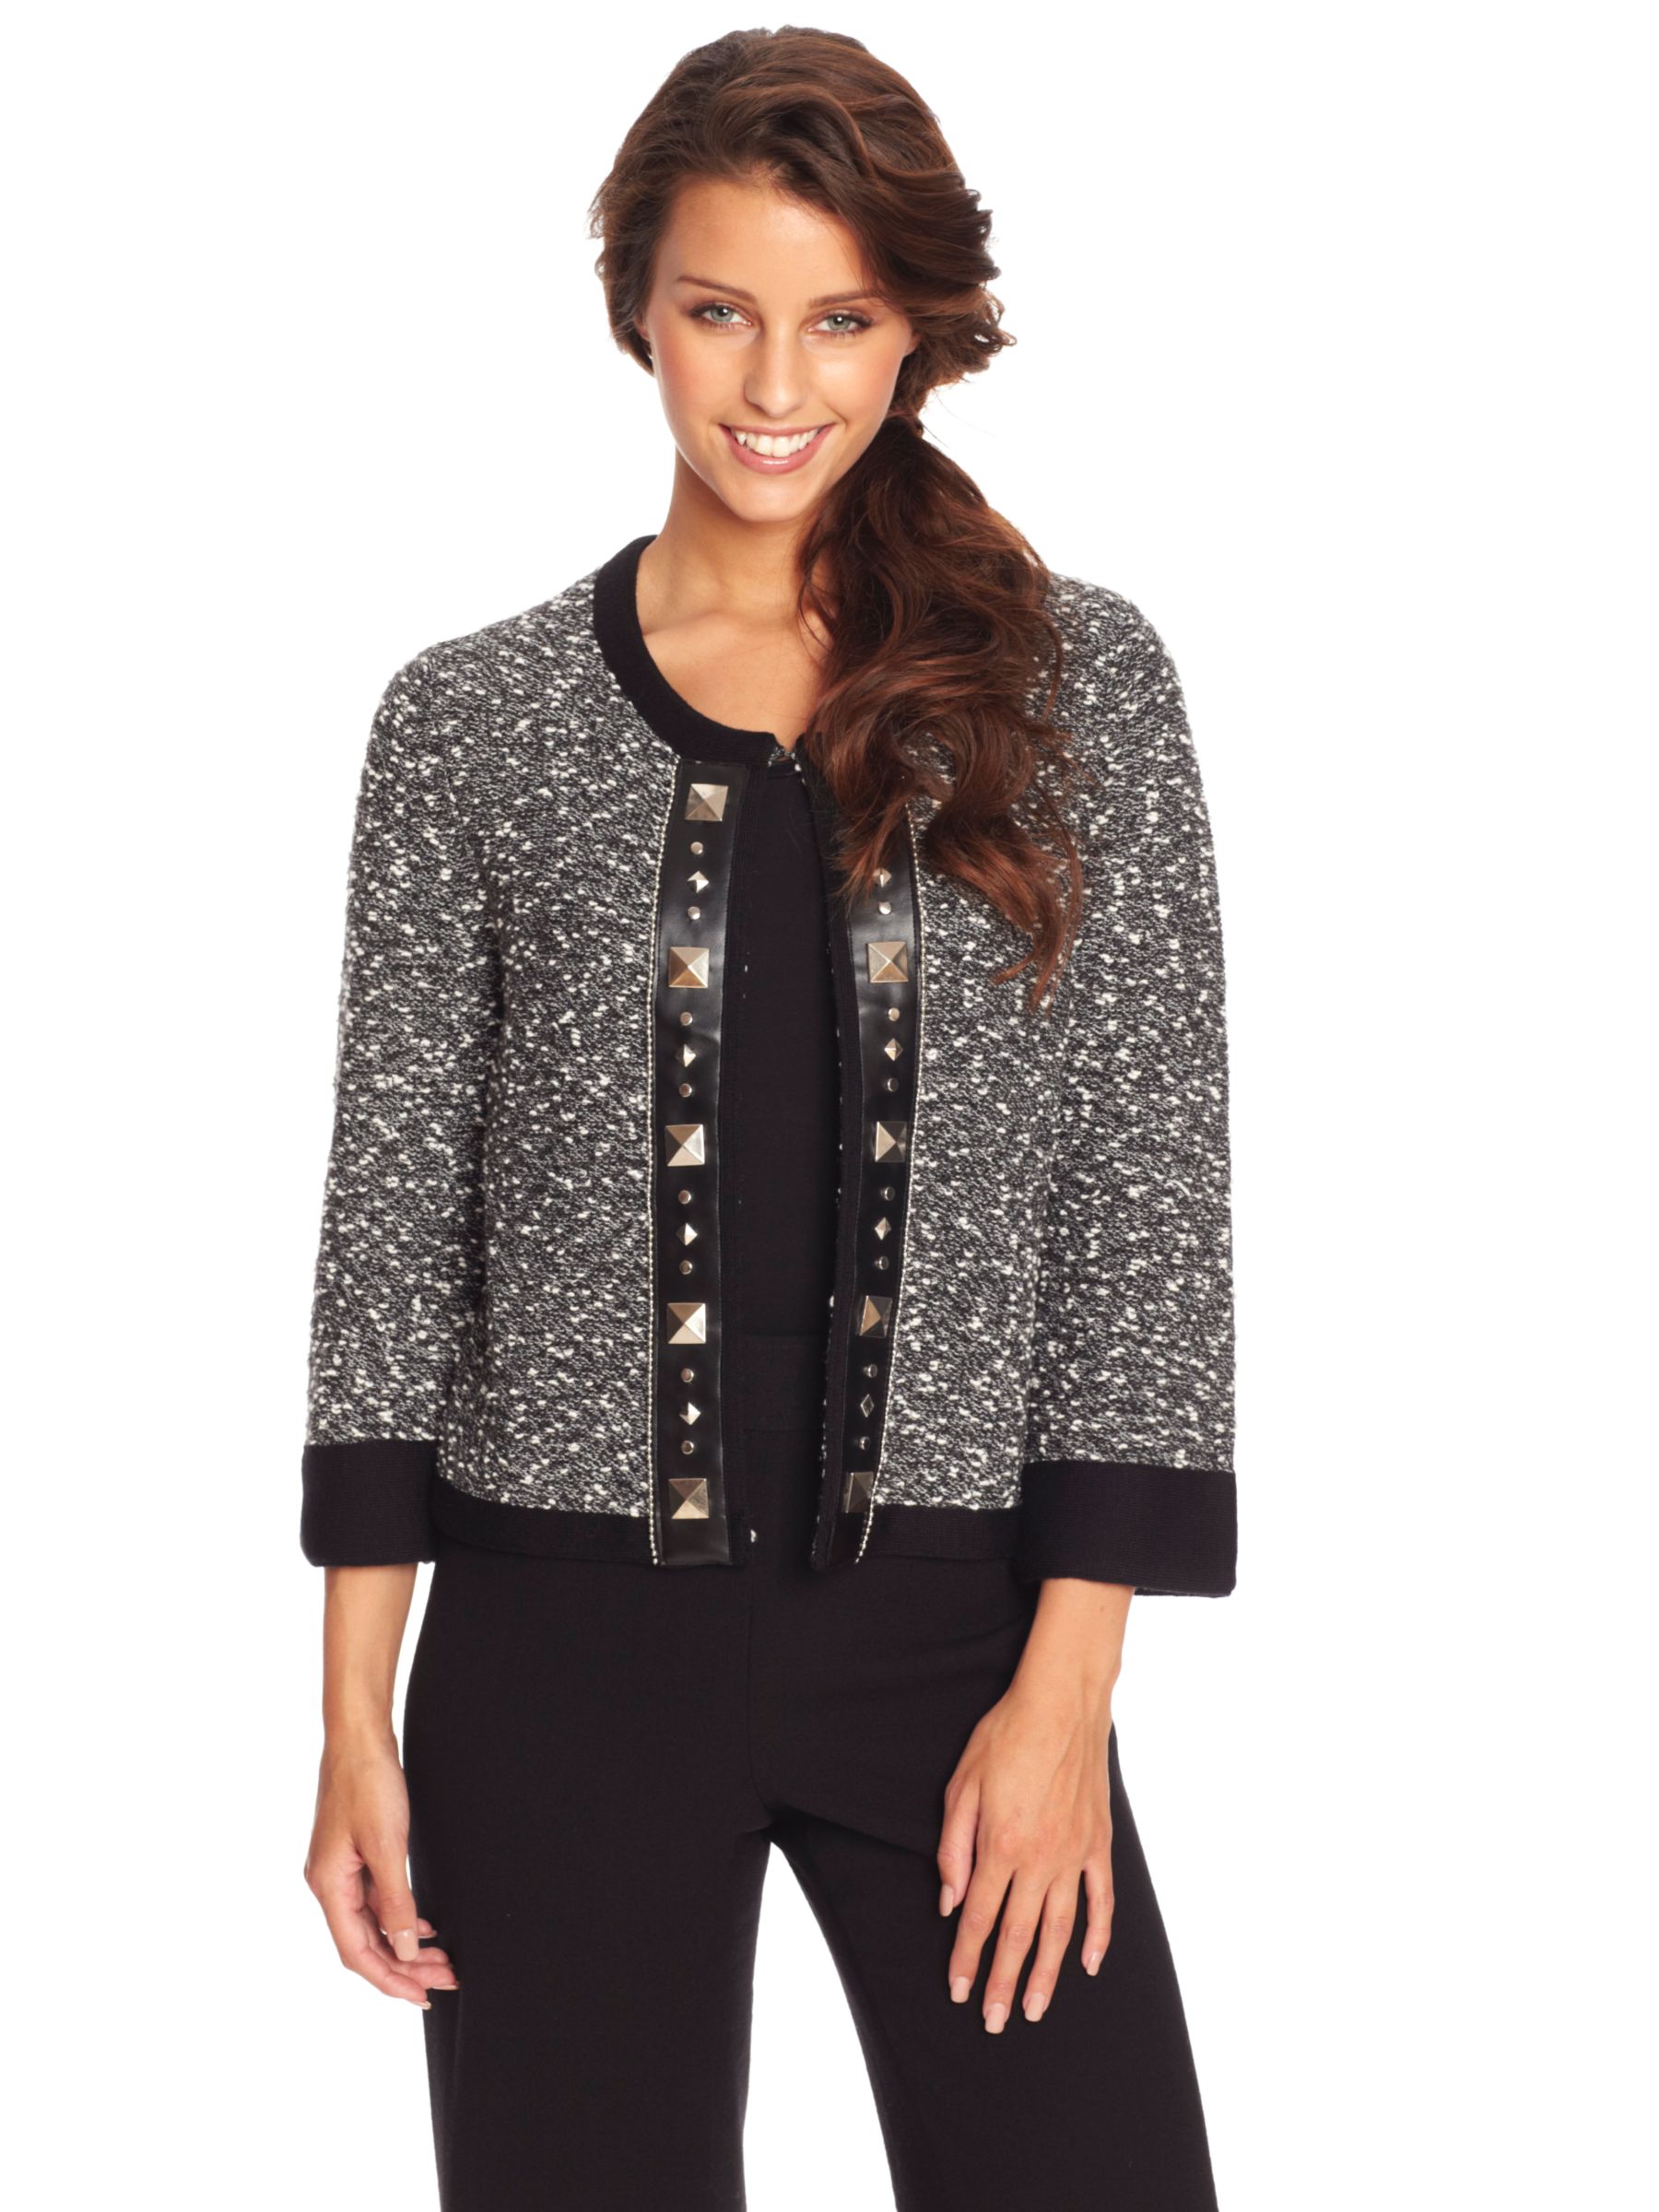 Betty Barclay Stud And Leather Boucle Knit Cardigan, Black/cream at John Lewis